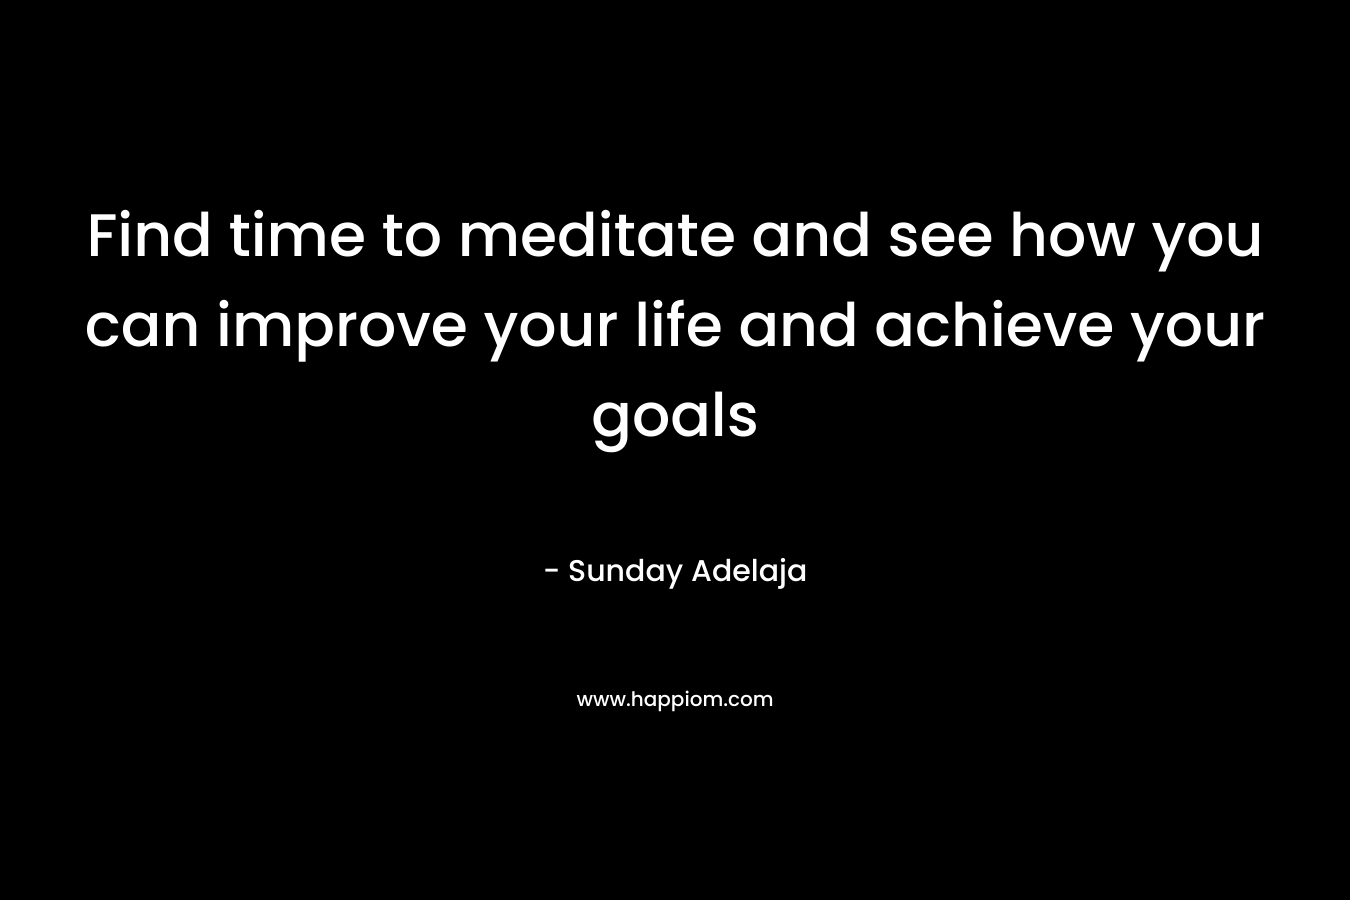 Find time to meditate and see how you can improve your life and achieve your goals